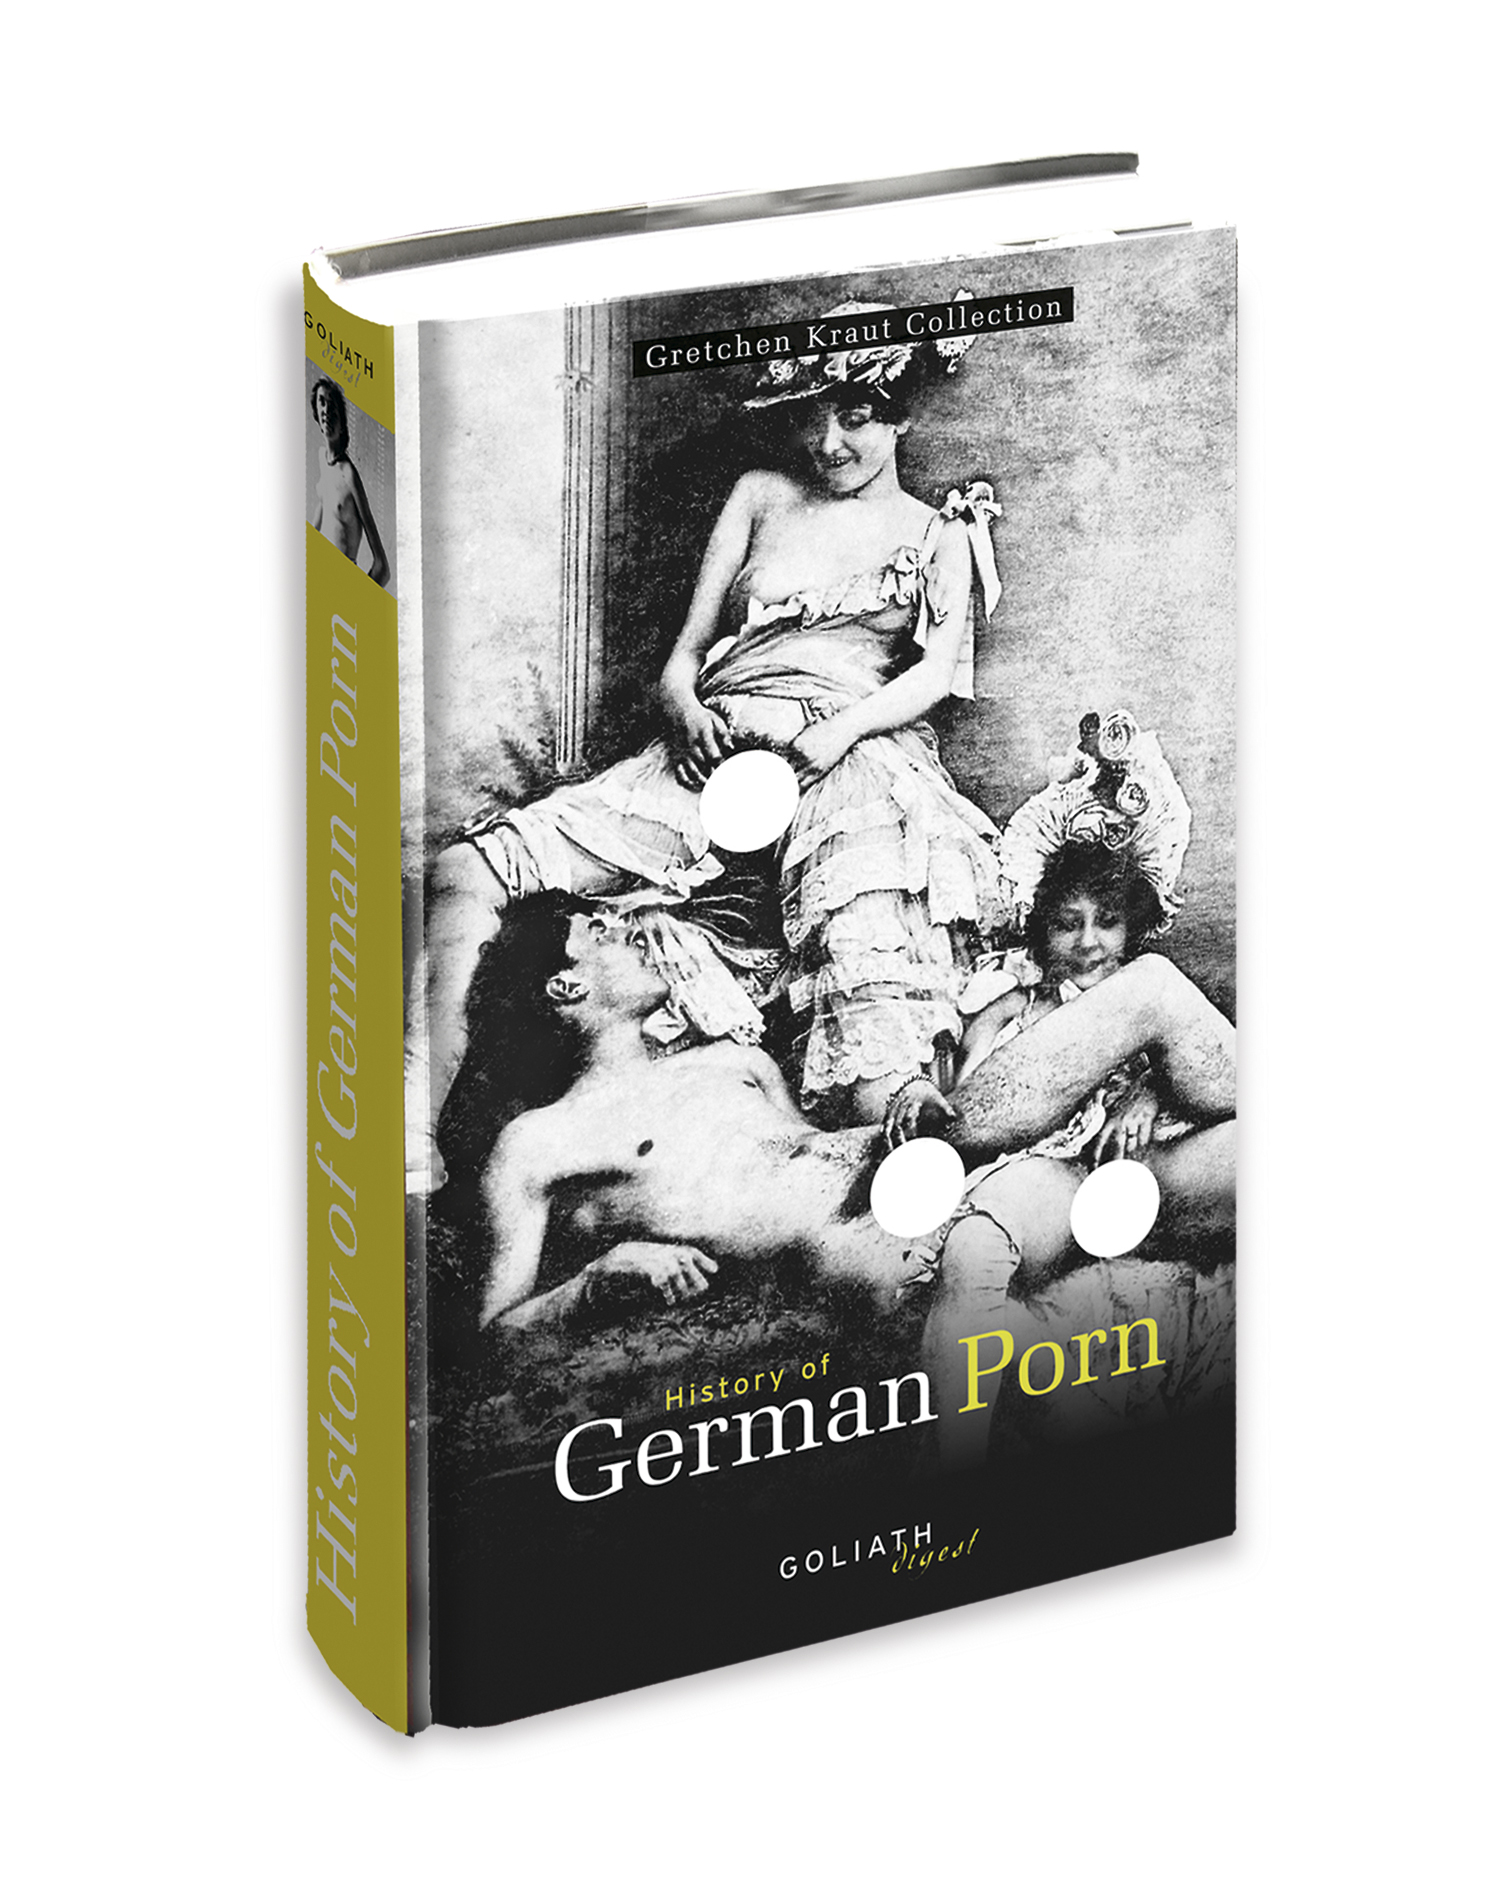 Art’s World – History of German Porn” Gretchen Kraut Collection – It is available from www.goliathbooks.com